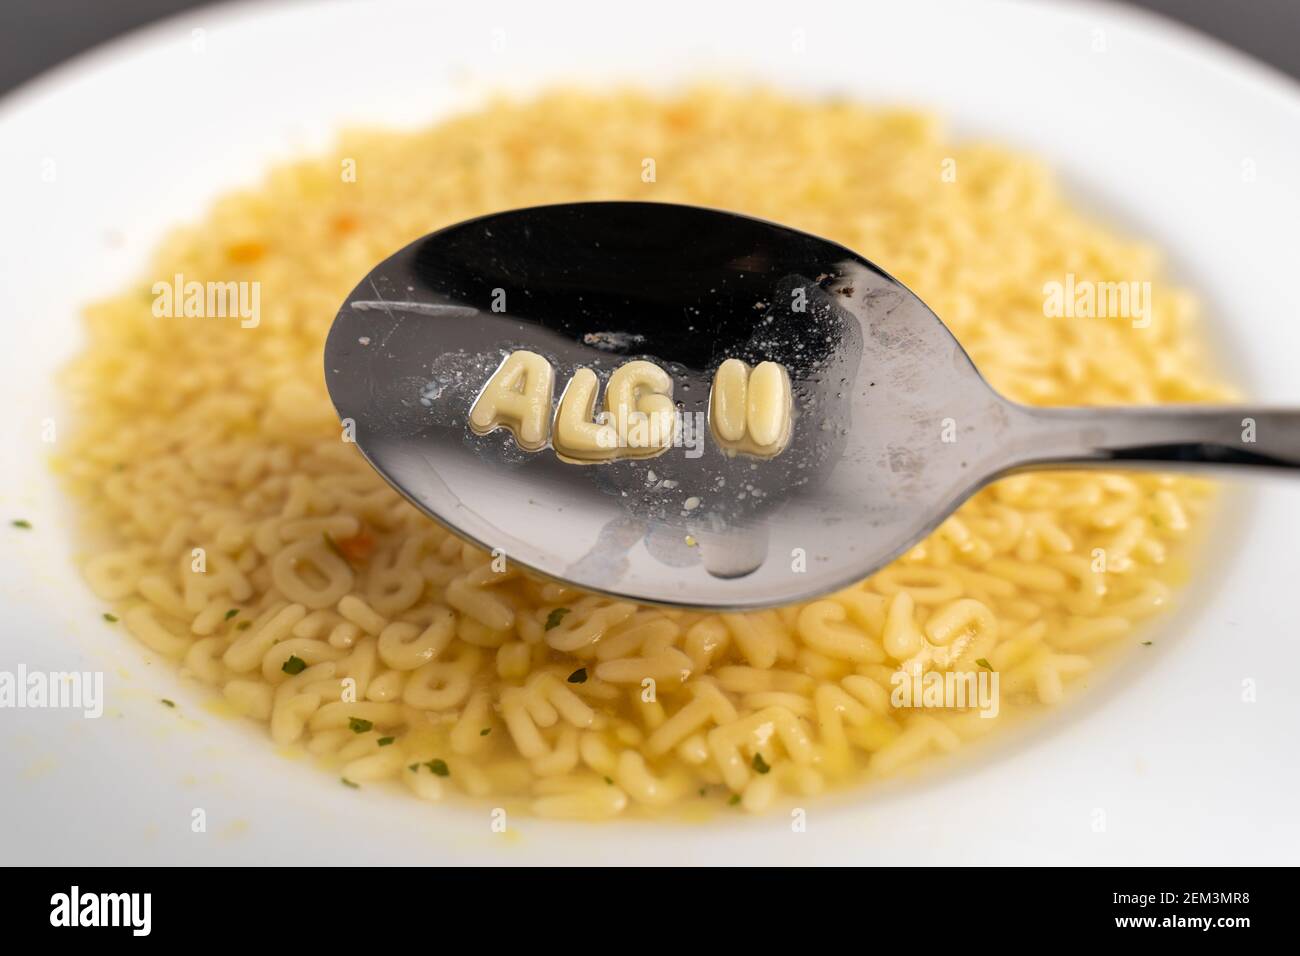 Alphabet soup letters with ALG 2 on the spoon, instant easy fast food because of poverty Stock Photo